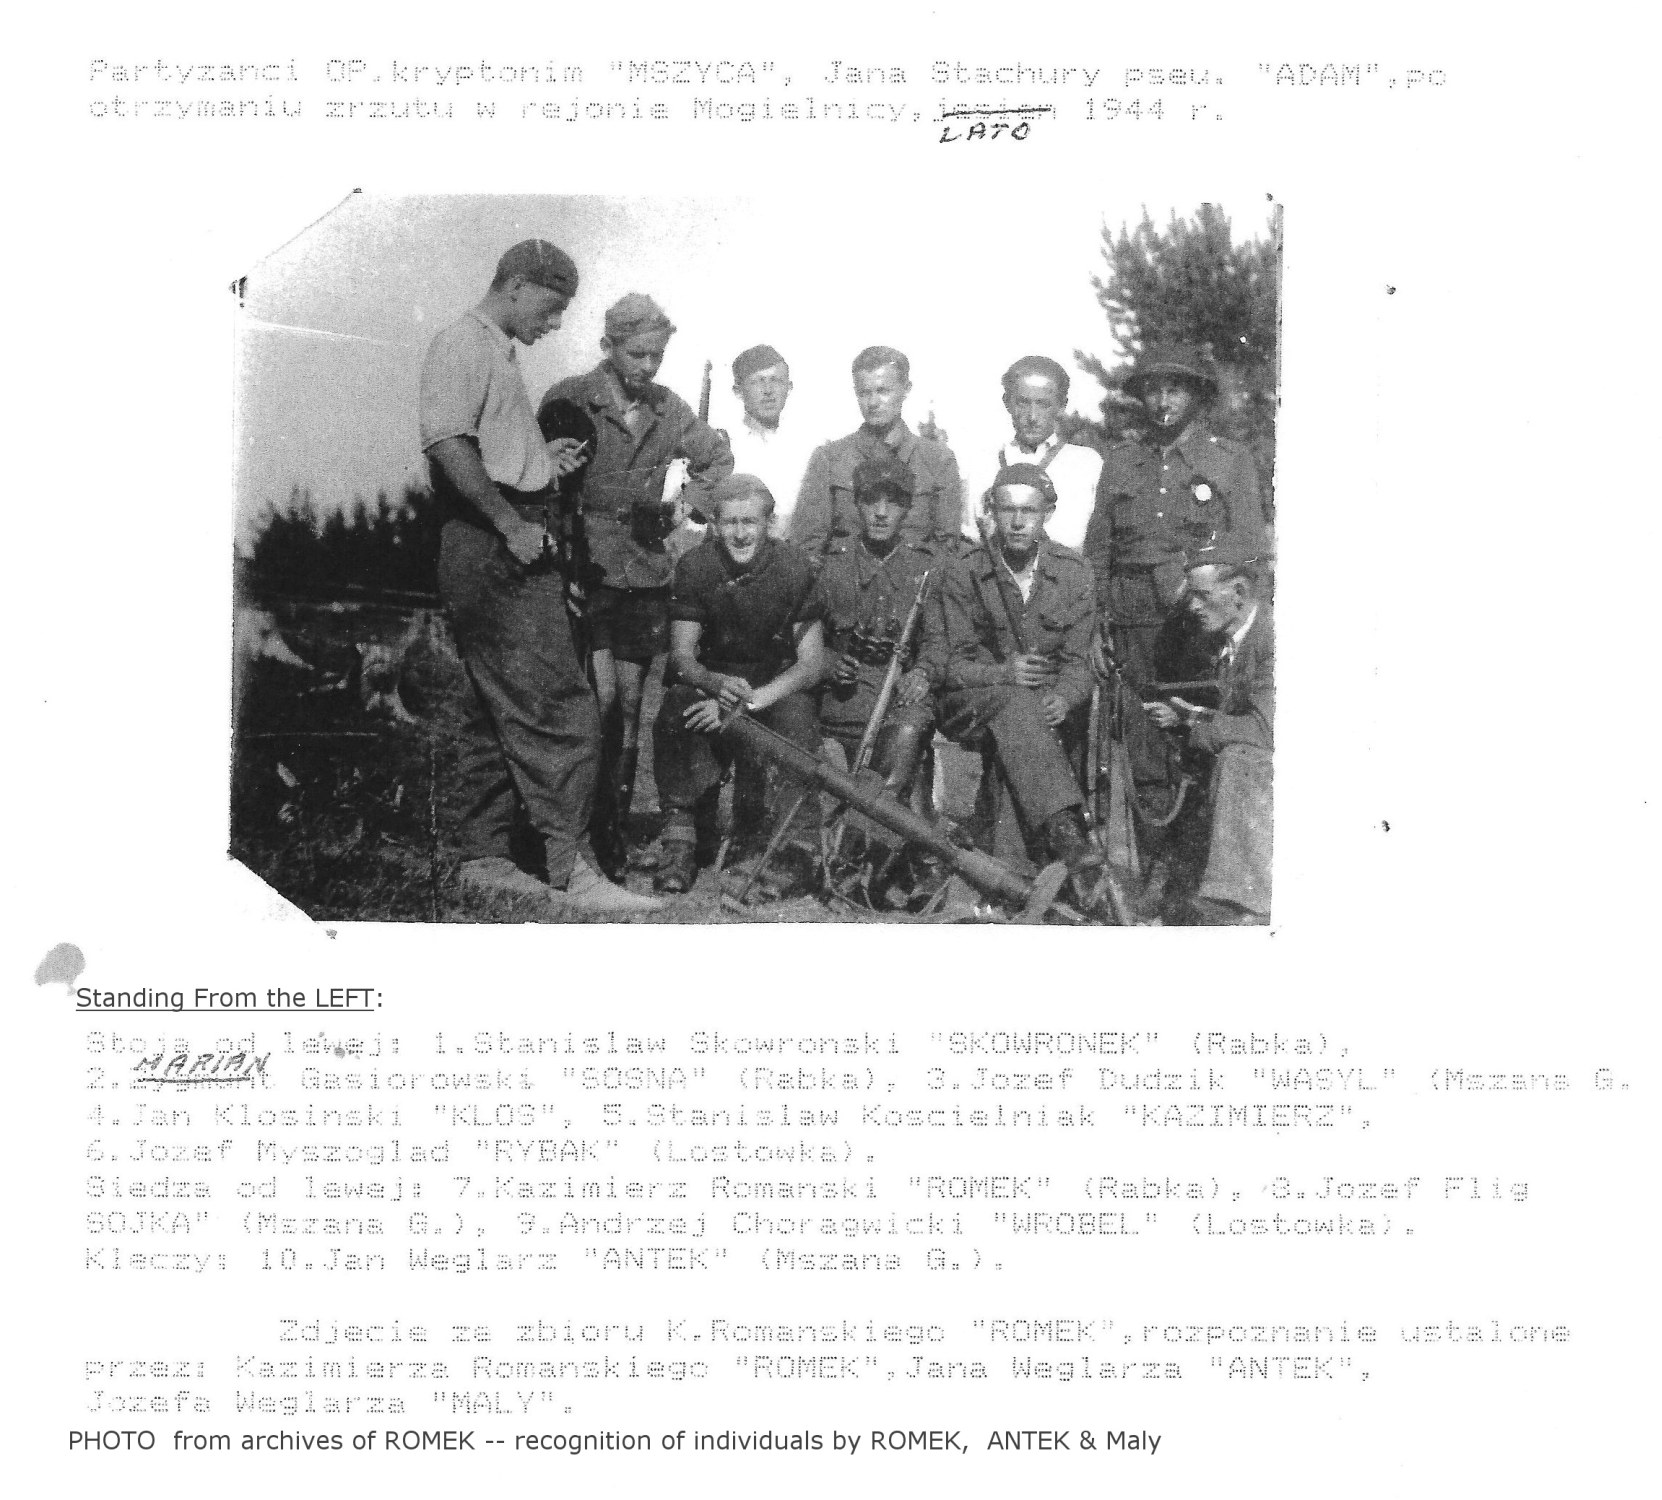 Photo: MSZYCA Unit Partisans after receiving an Airdrop in Mogielnica  Summer 1944